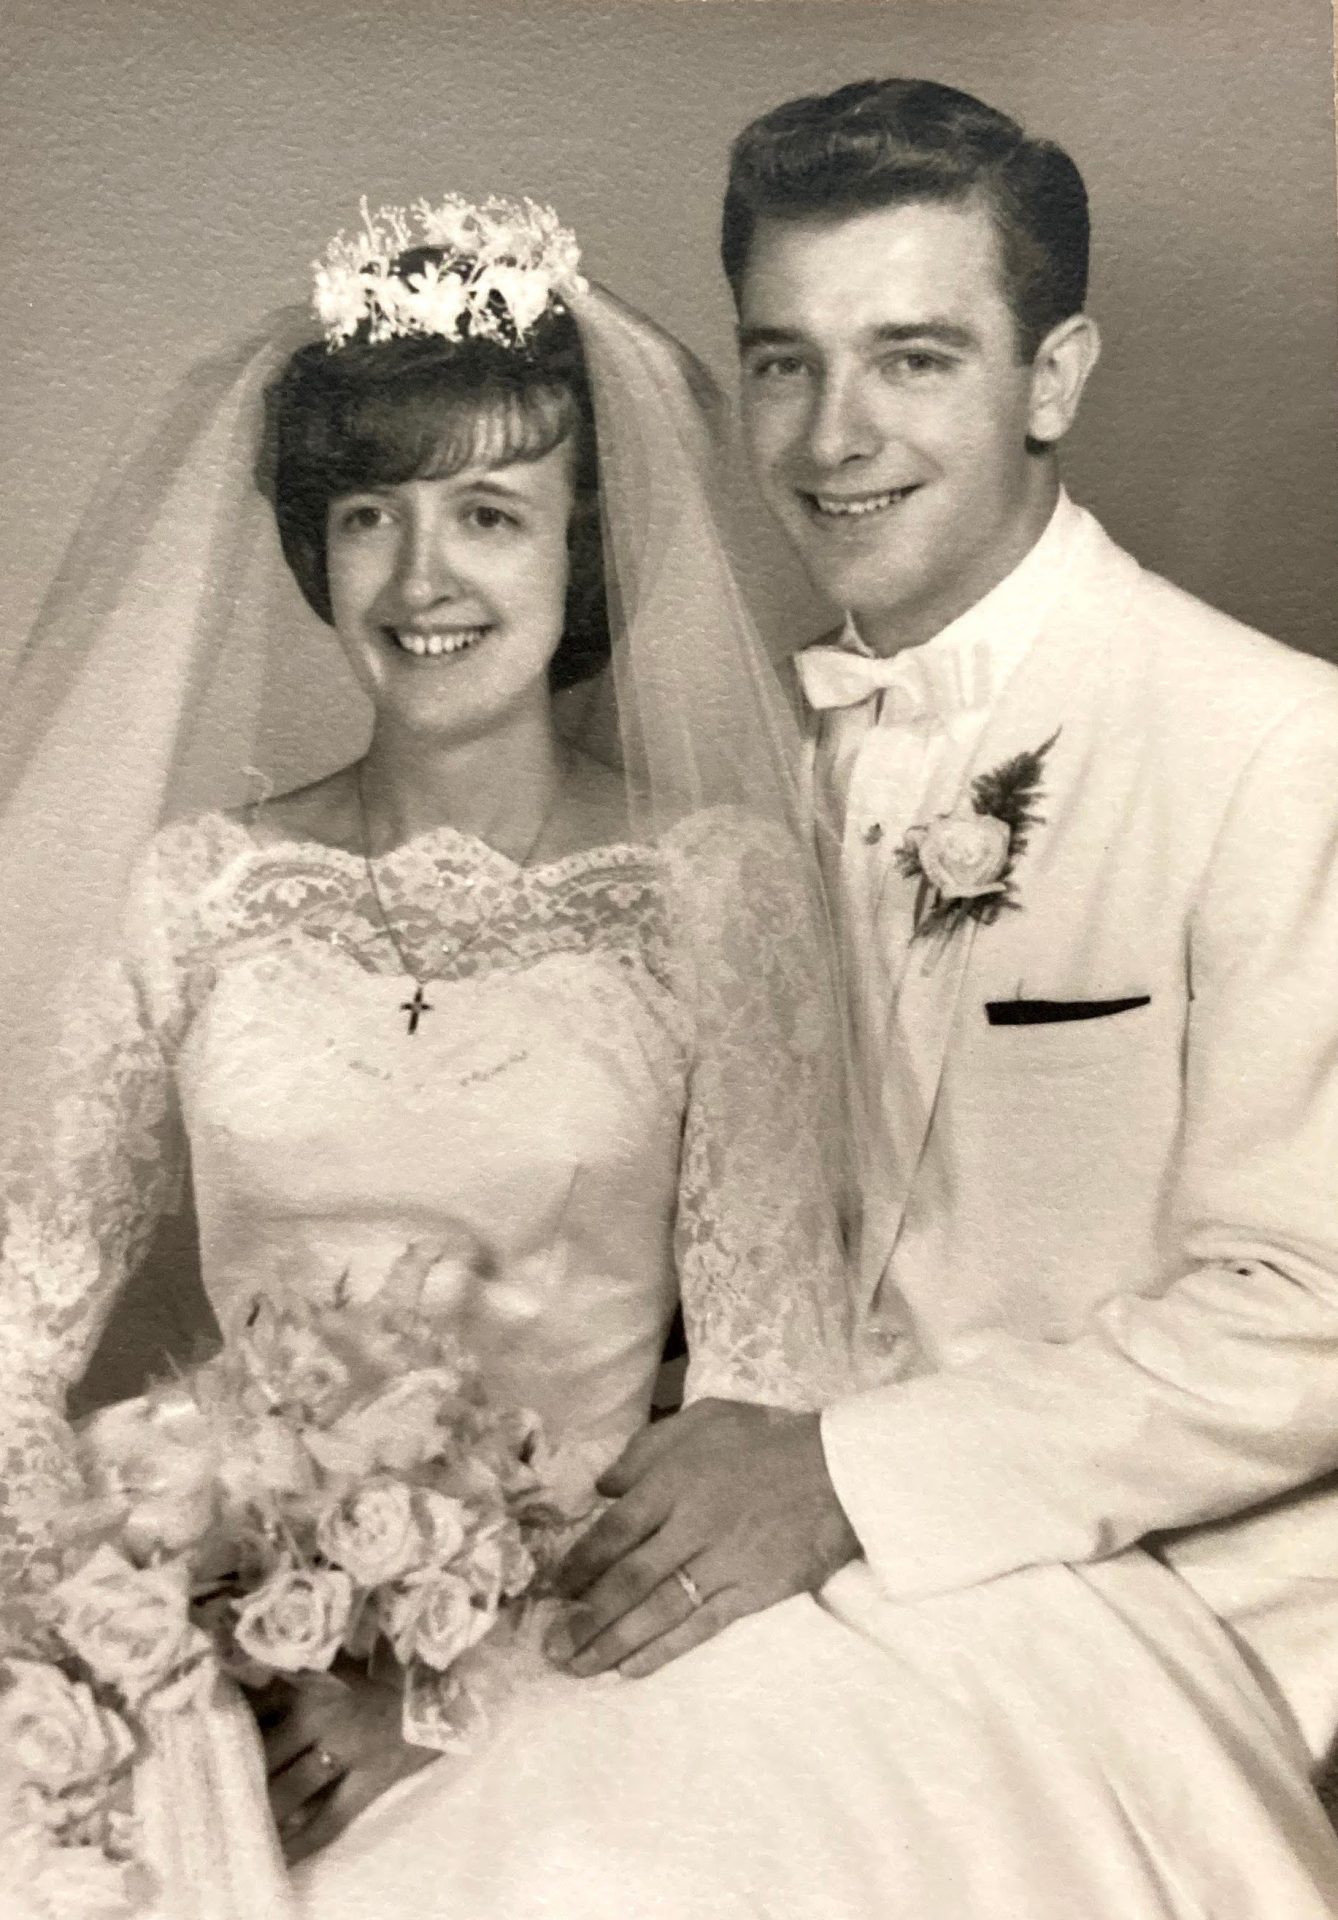 Charlotte and Dennis Leach - Married April 16, 1966.